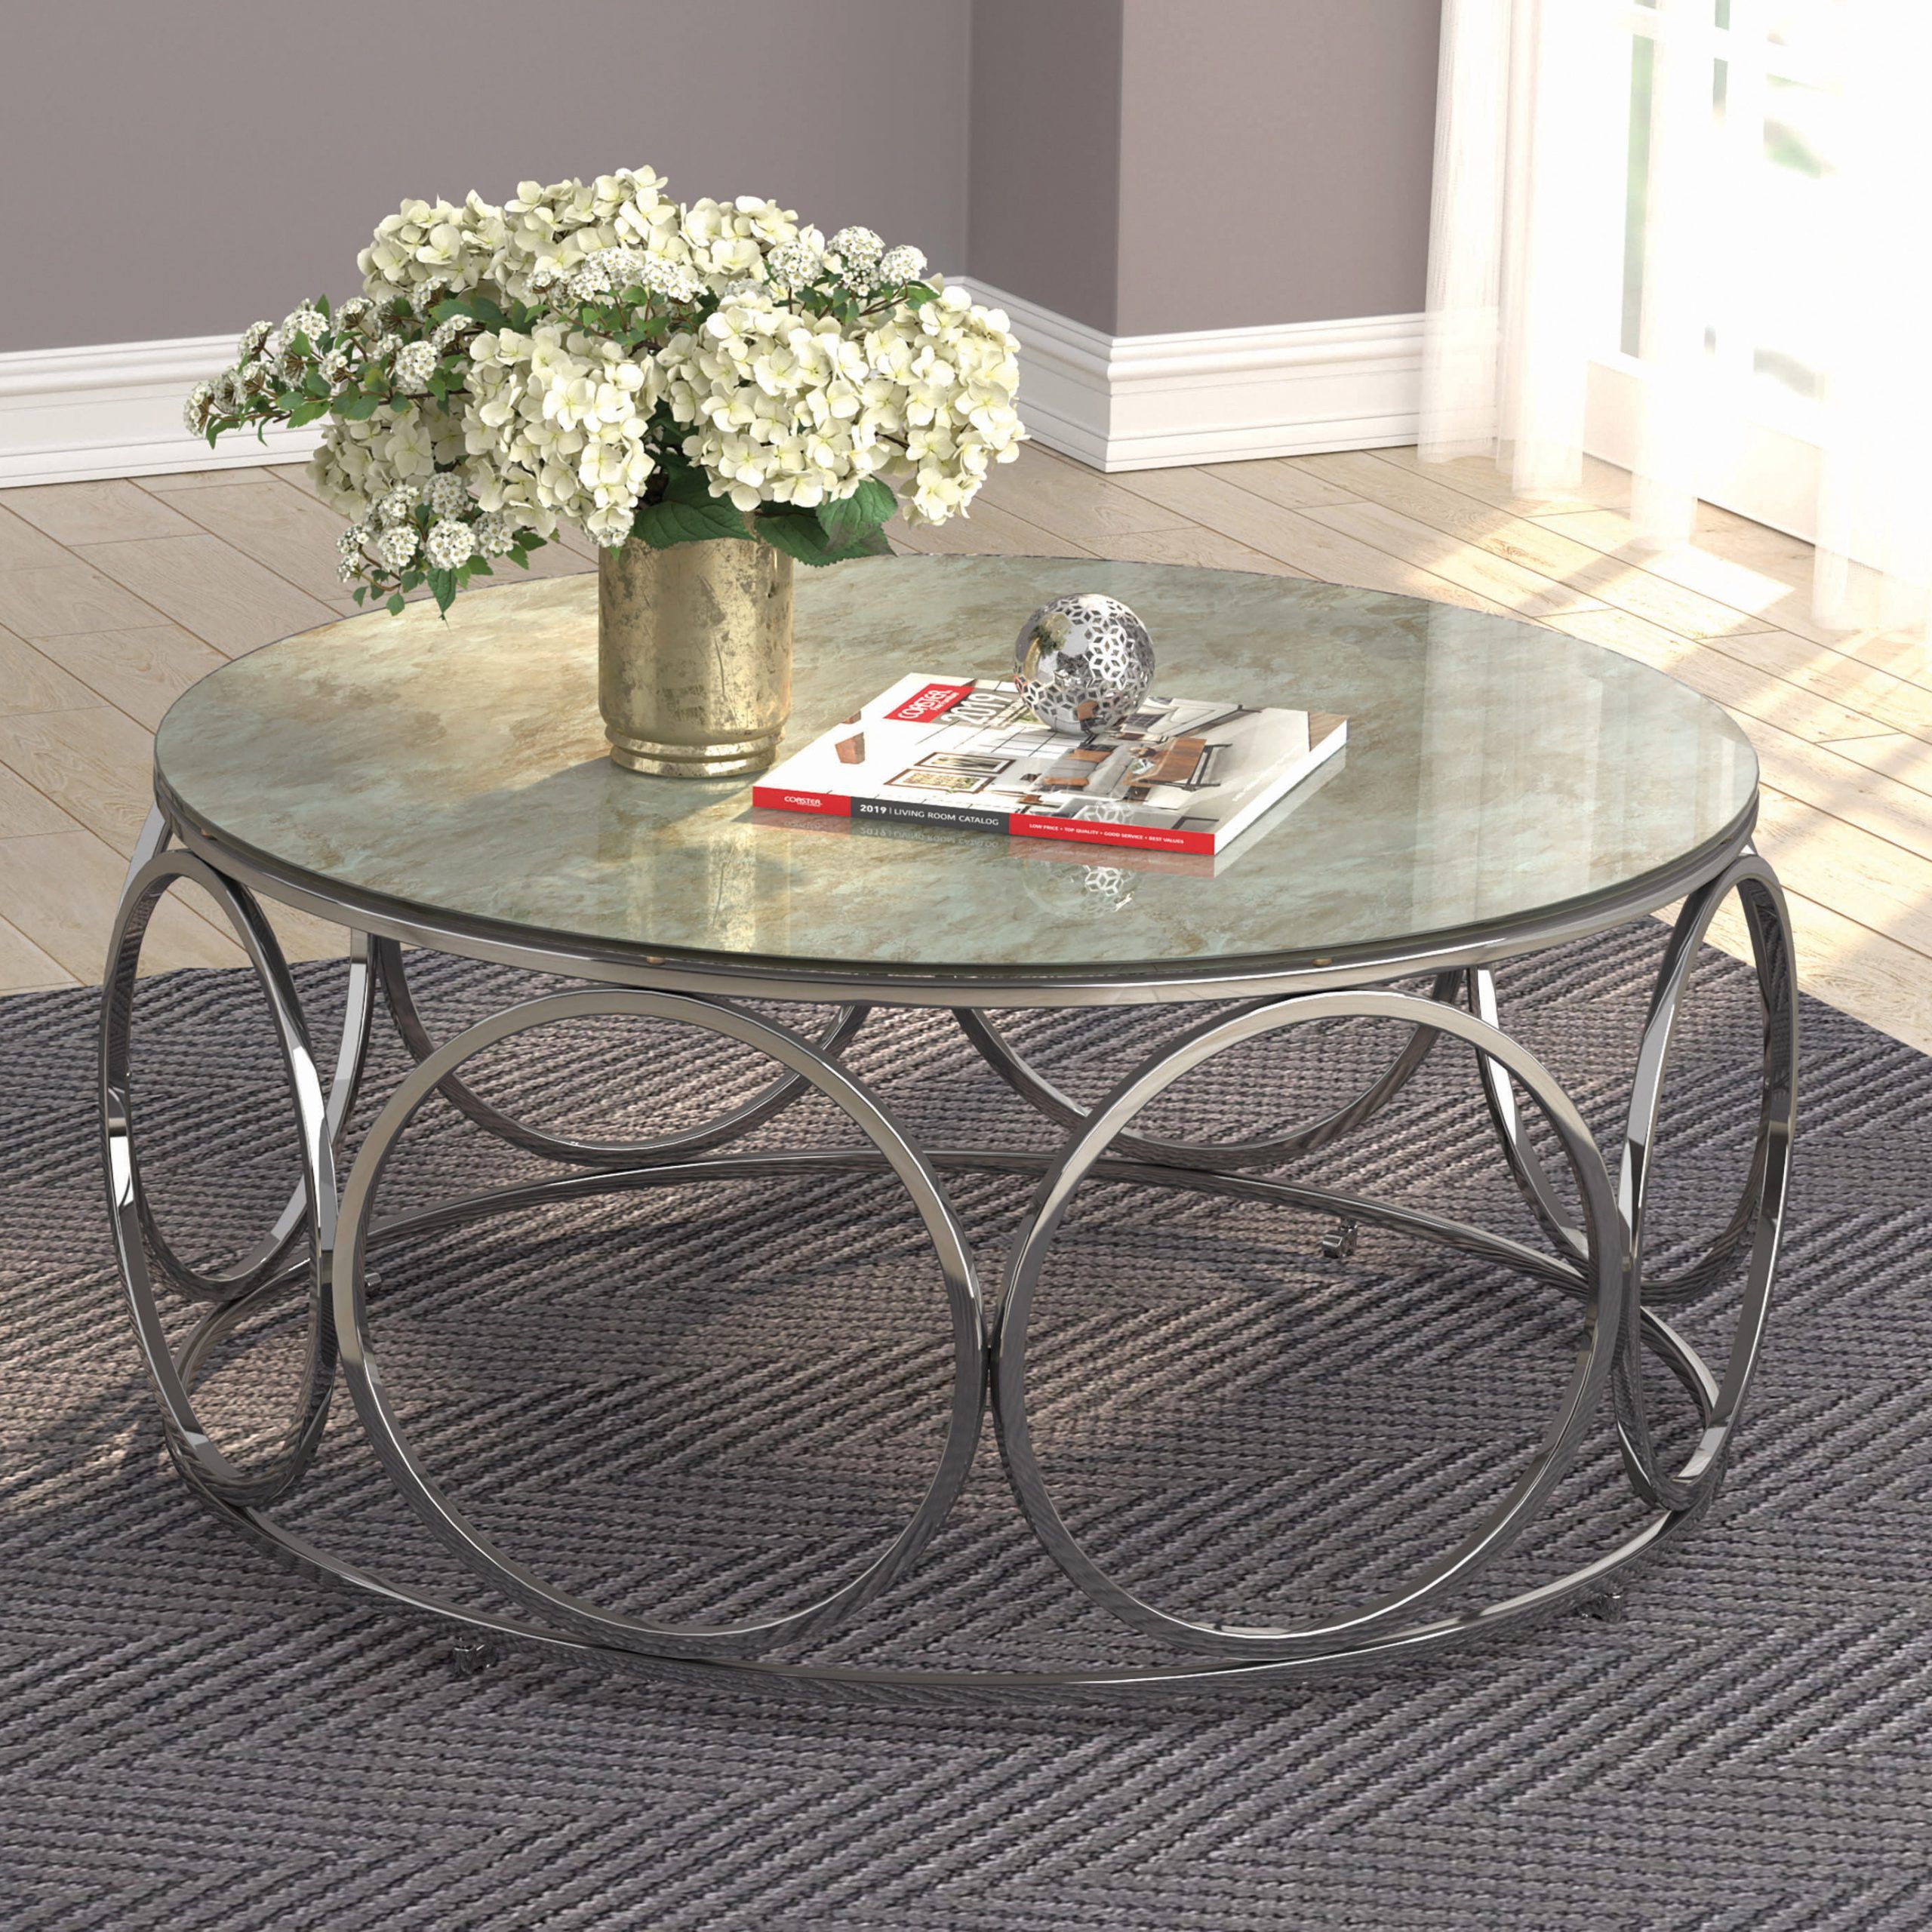 Round Coffee Table With Casters Beige Marble And Chrome – Walmart For Coffee Tables With Casters (View 4 of 15)